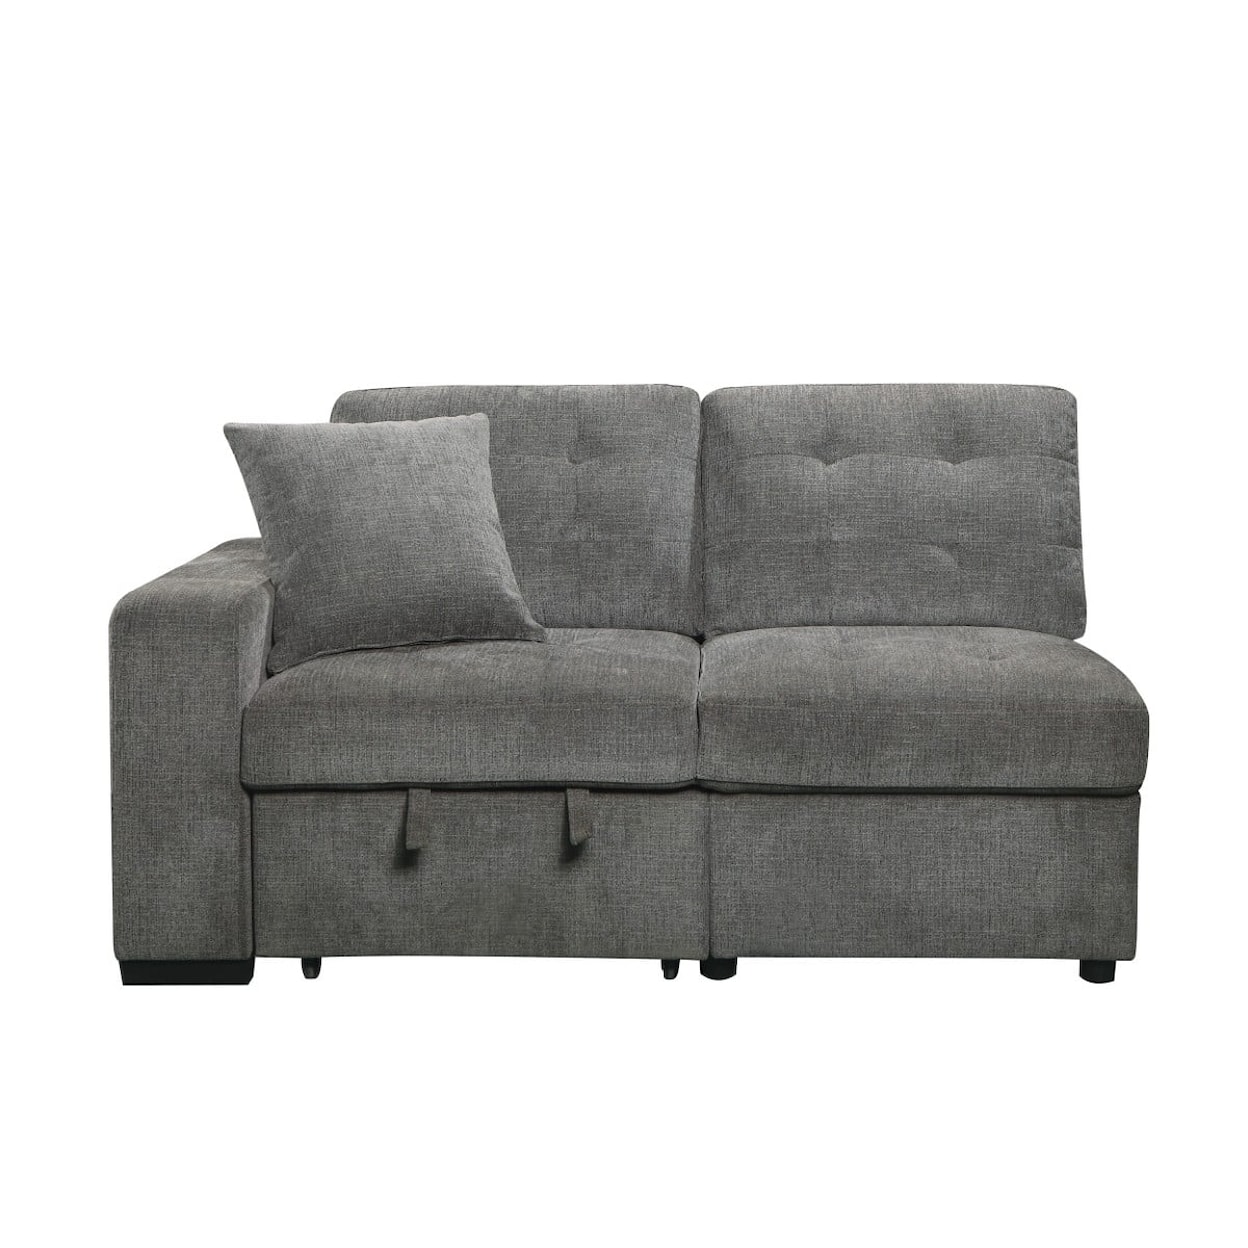 Homelegance Furniture Logansport 2-Piece Sectional with Pull-out Ottoman